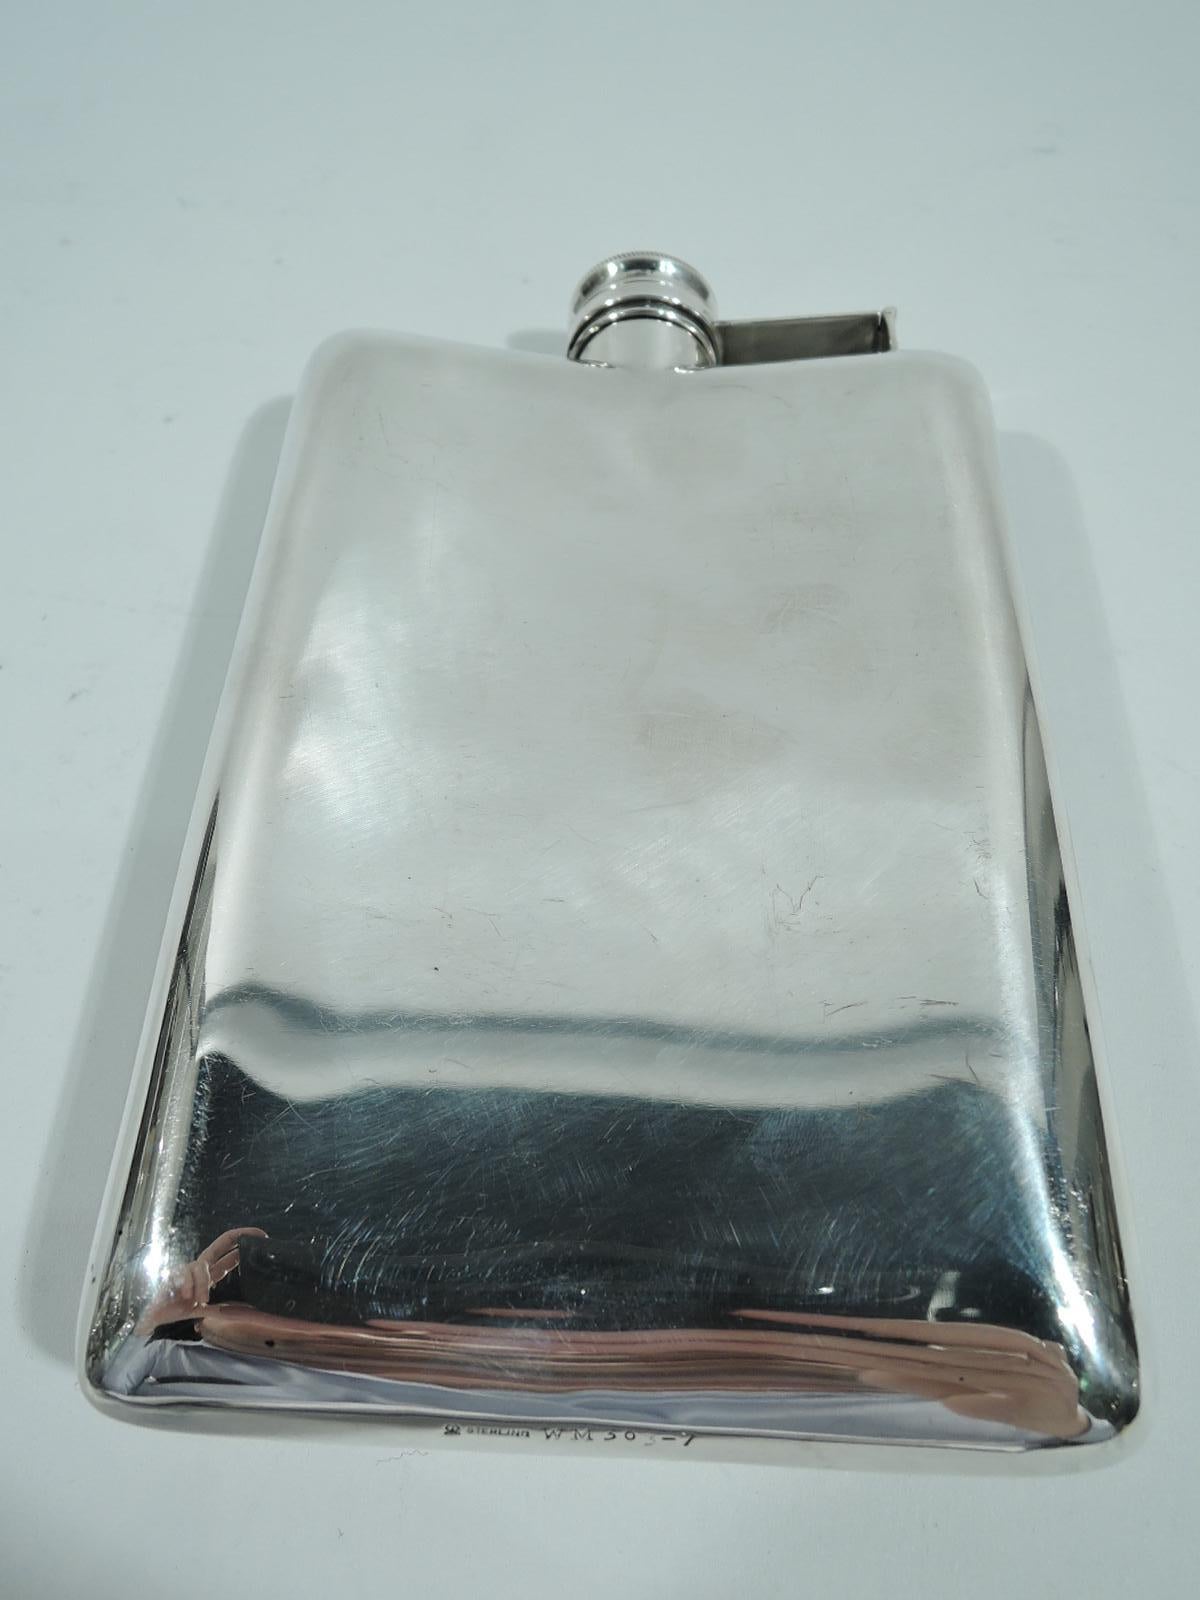 Art Deco sterling silver hip flask. Made by Meriden Britannia (part of International) in Connecticut, ca 1930. Rectilinear and concave with hinged and cork-lined cover. On front is incised vertical geometric pattern. Fully marked and numbered